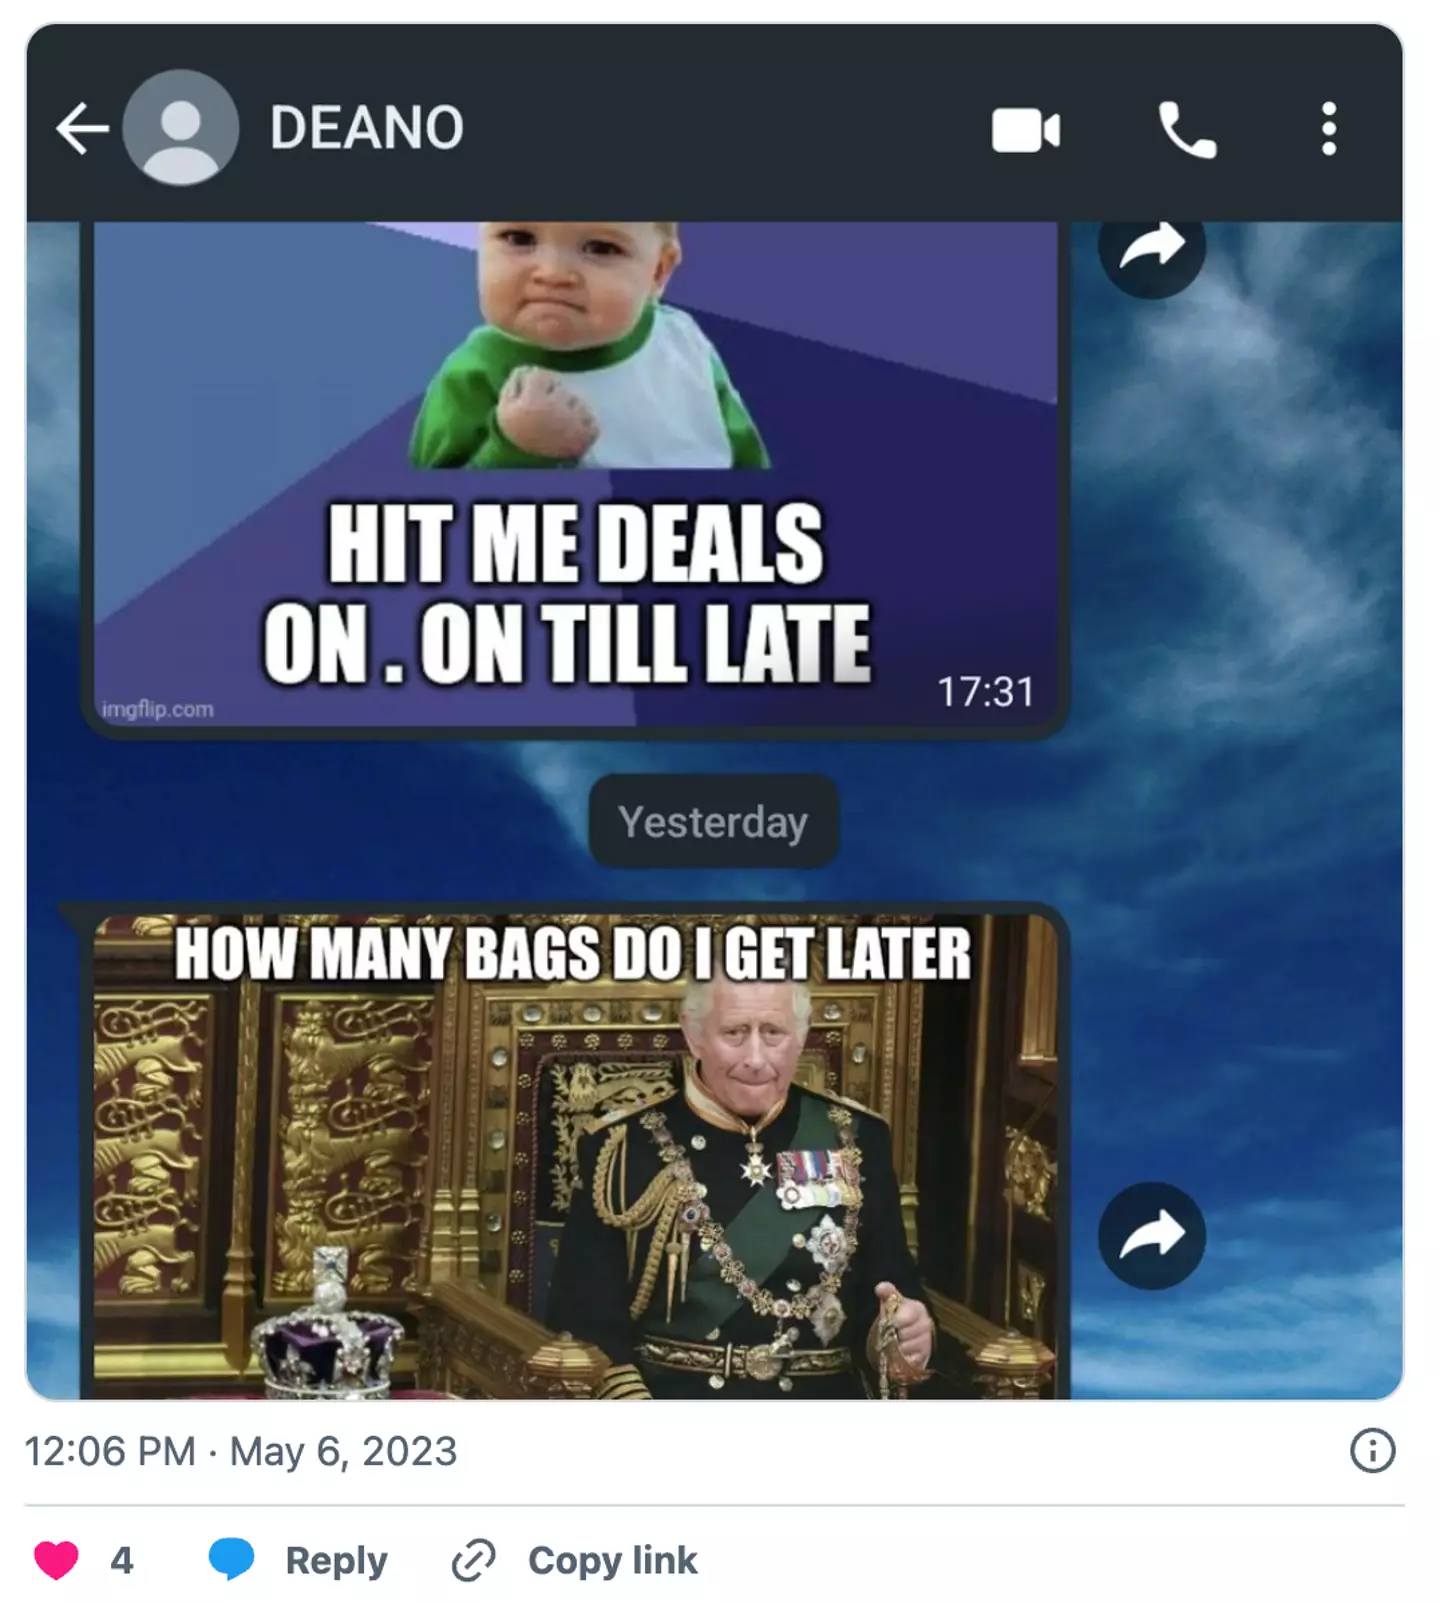 He's probably not actually called Deano.